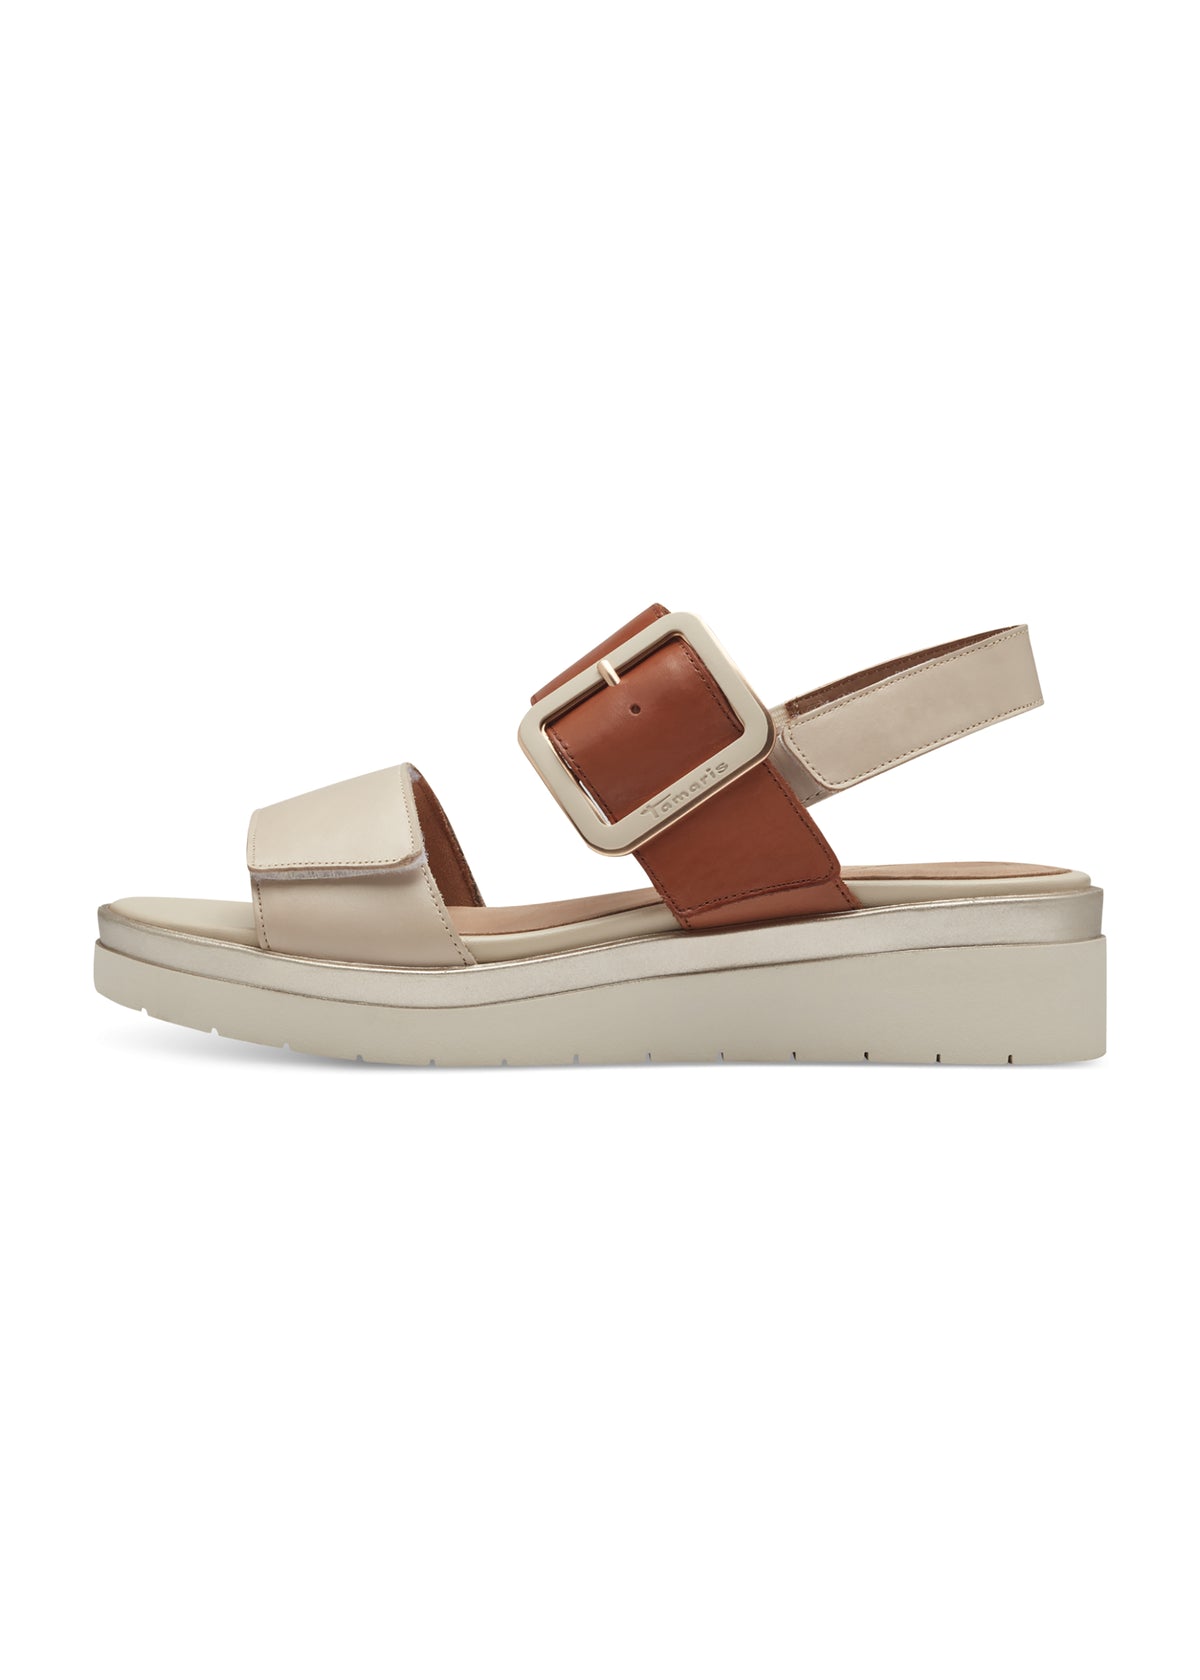 Sandals with a wedge sole - creamy-brown leather, adjustable straps